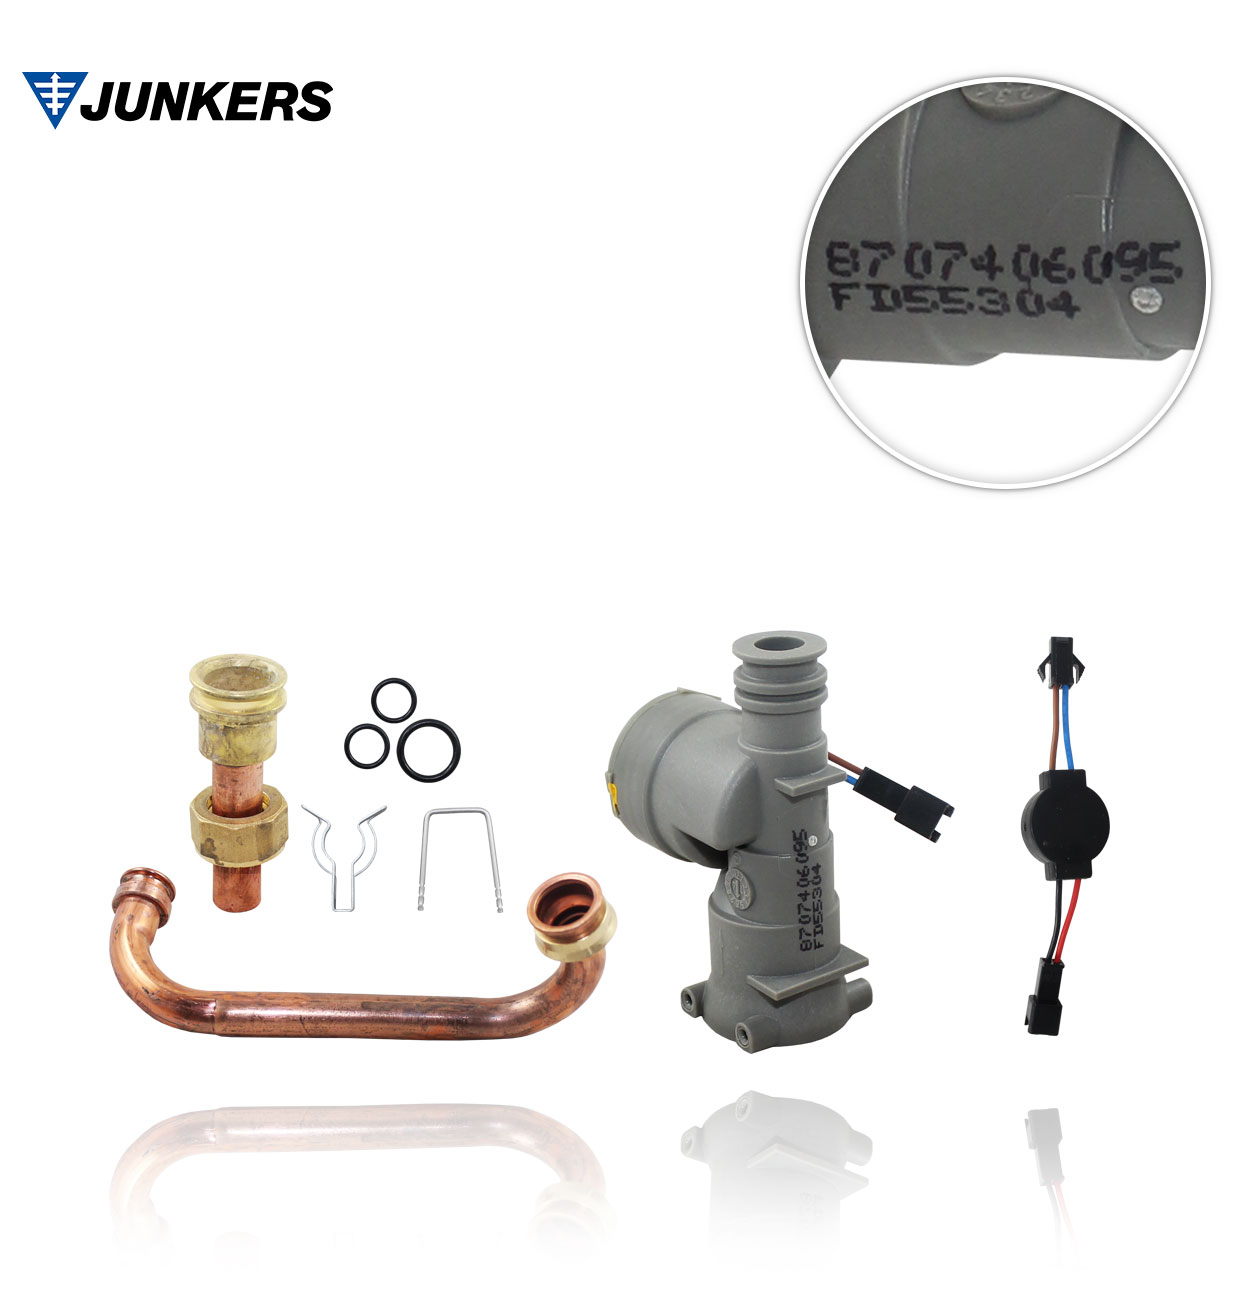 JUNKERS 8707406104 WR11 HYDROGENERATOR ASSEMBLY